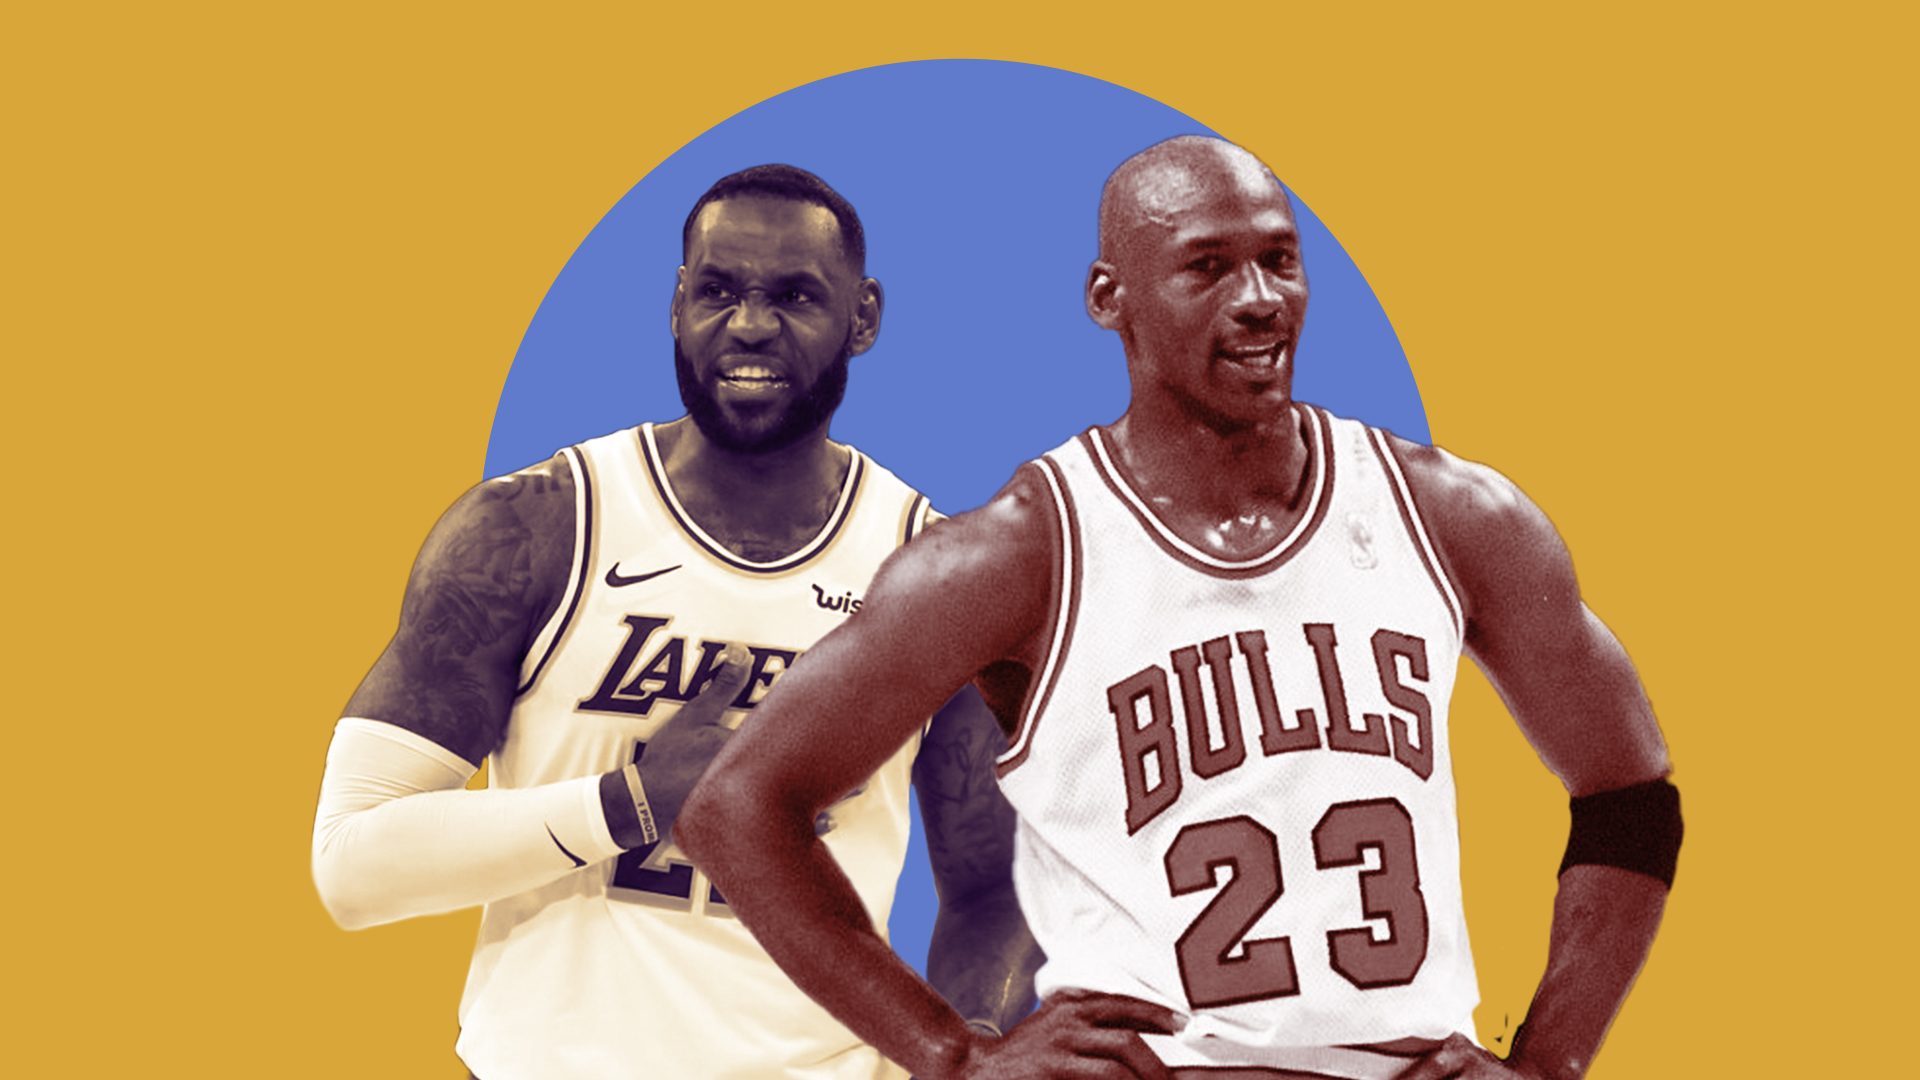 Basketball Forever on X: LeBron James is your 2020 NBA Finals MVP